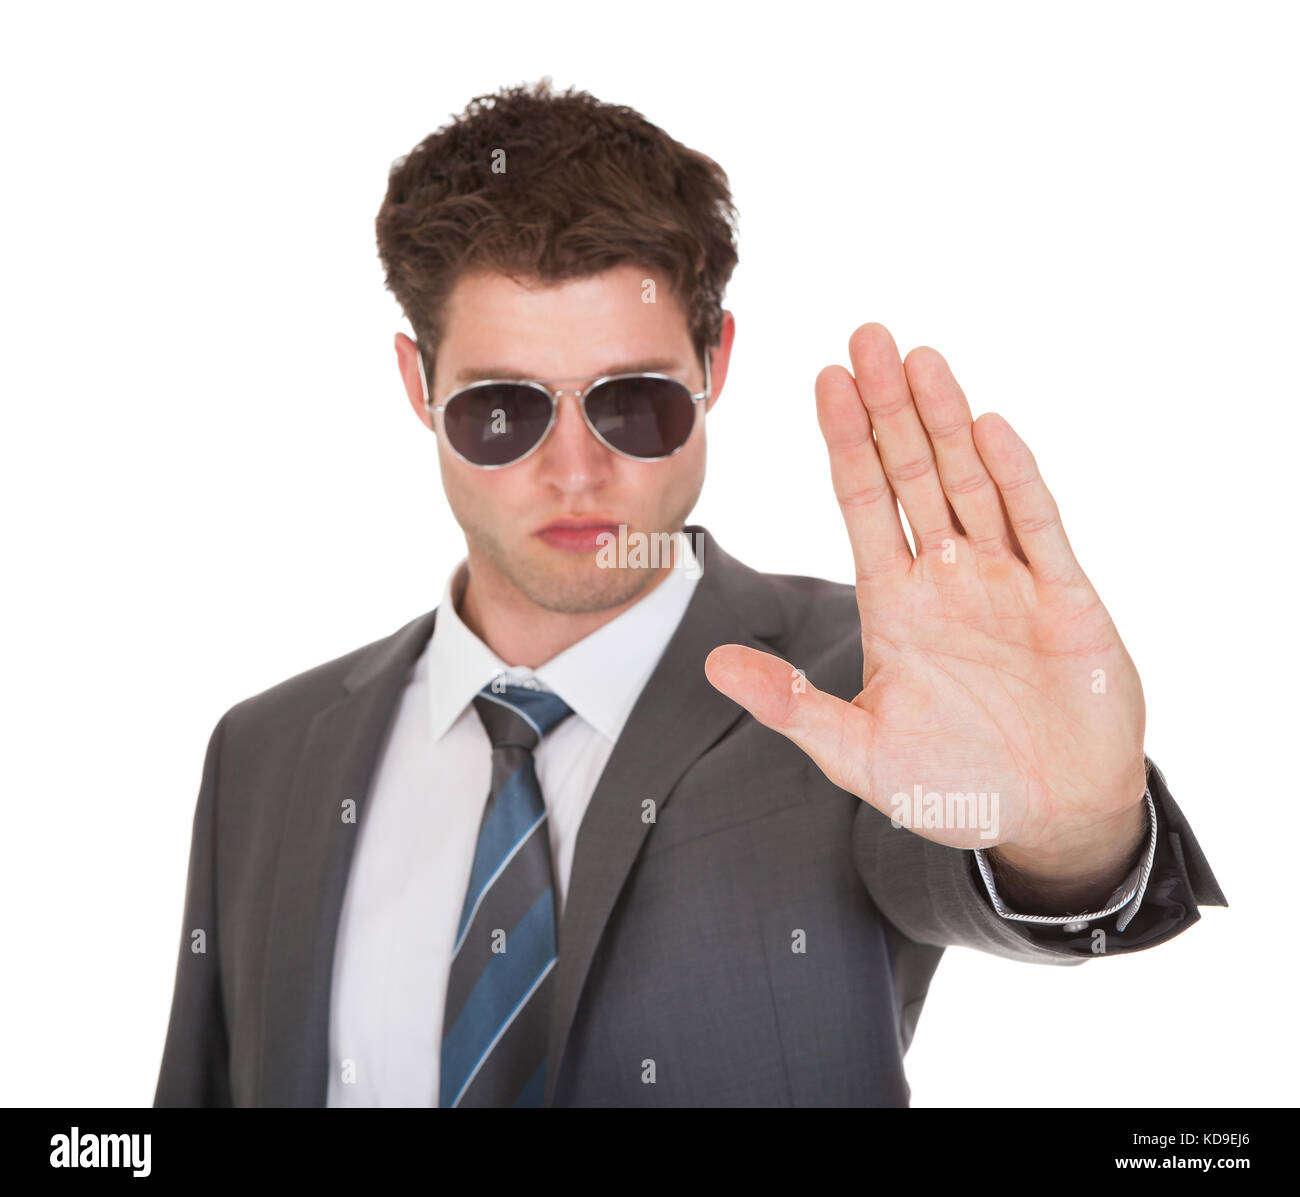 Portrait Of Young Businessman Gesturing On White Background Stock Photo